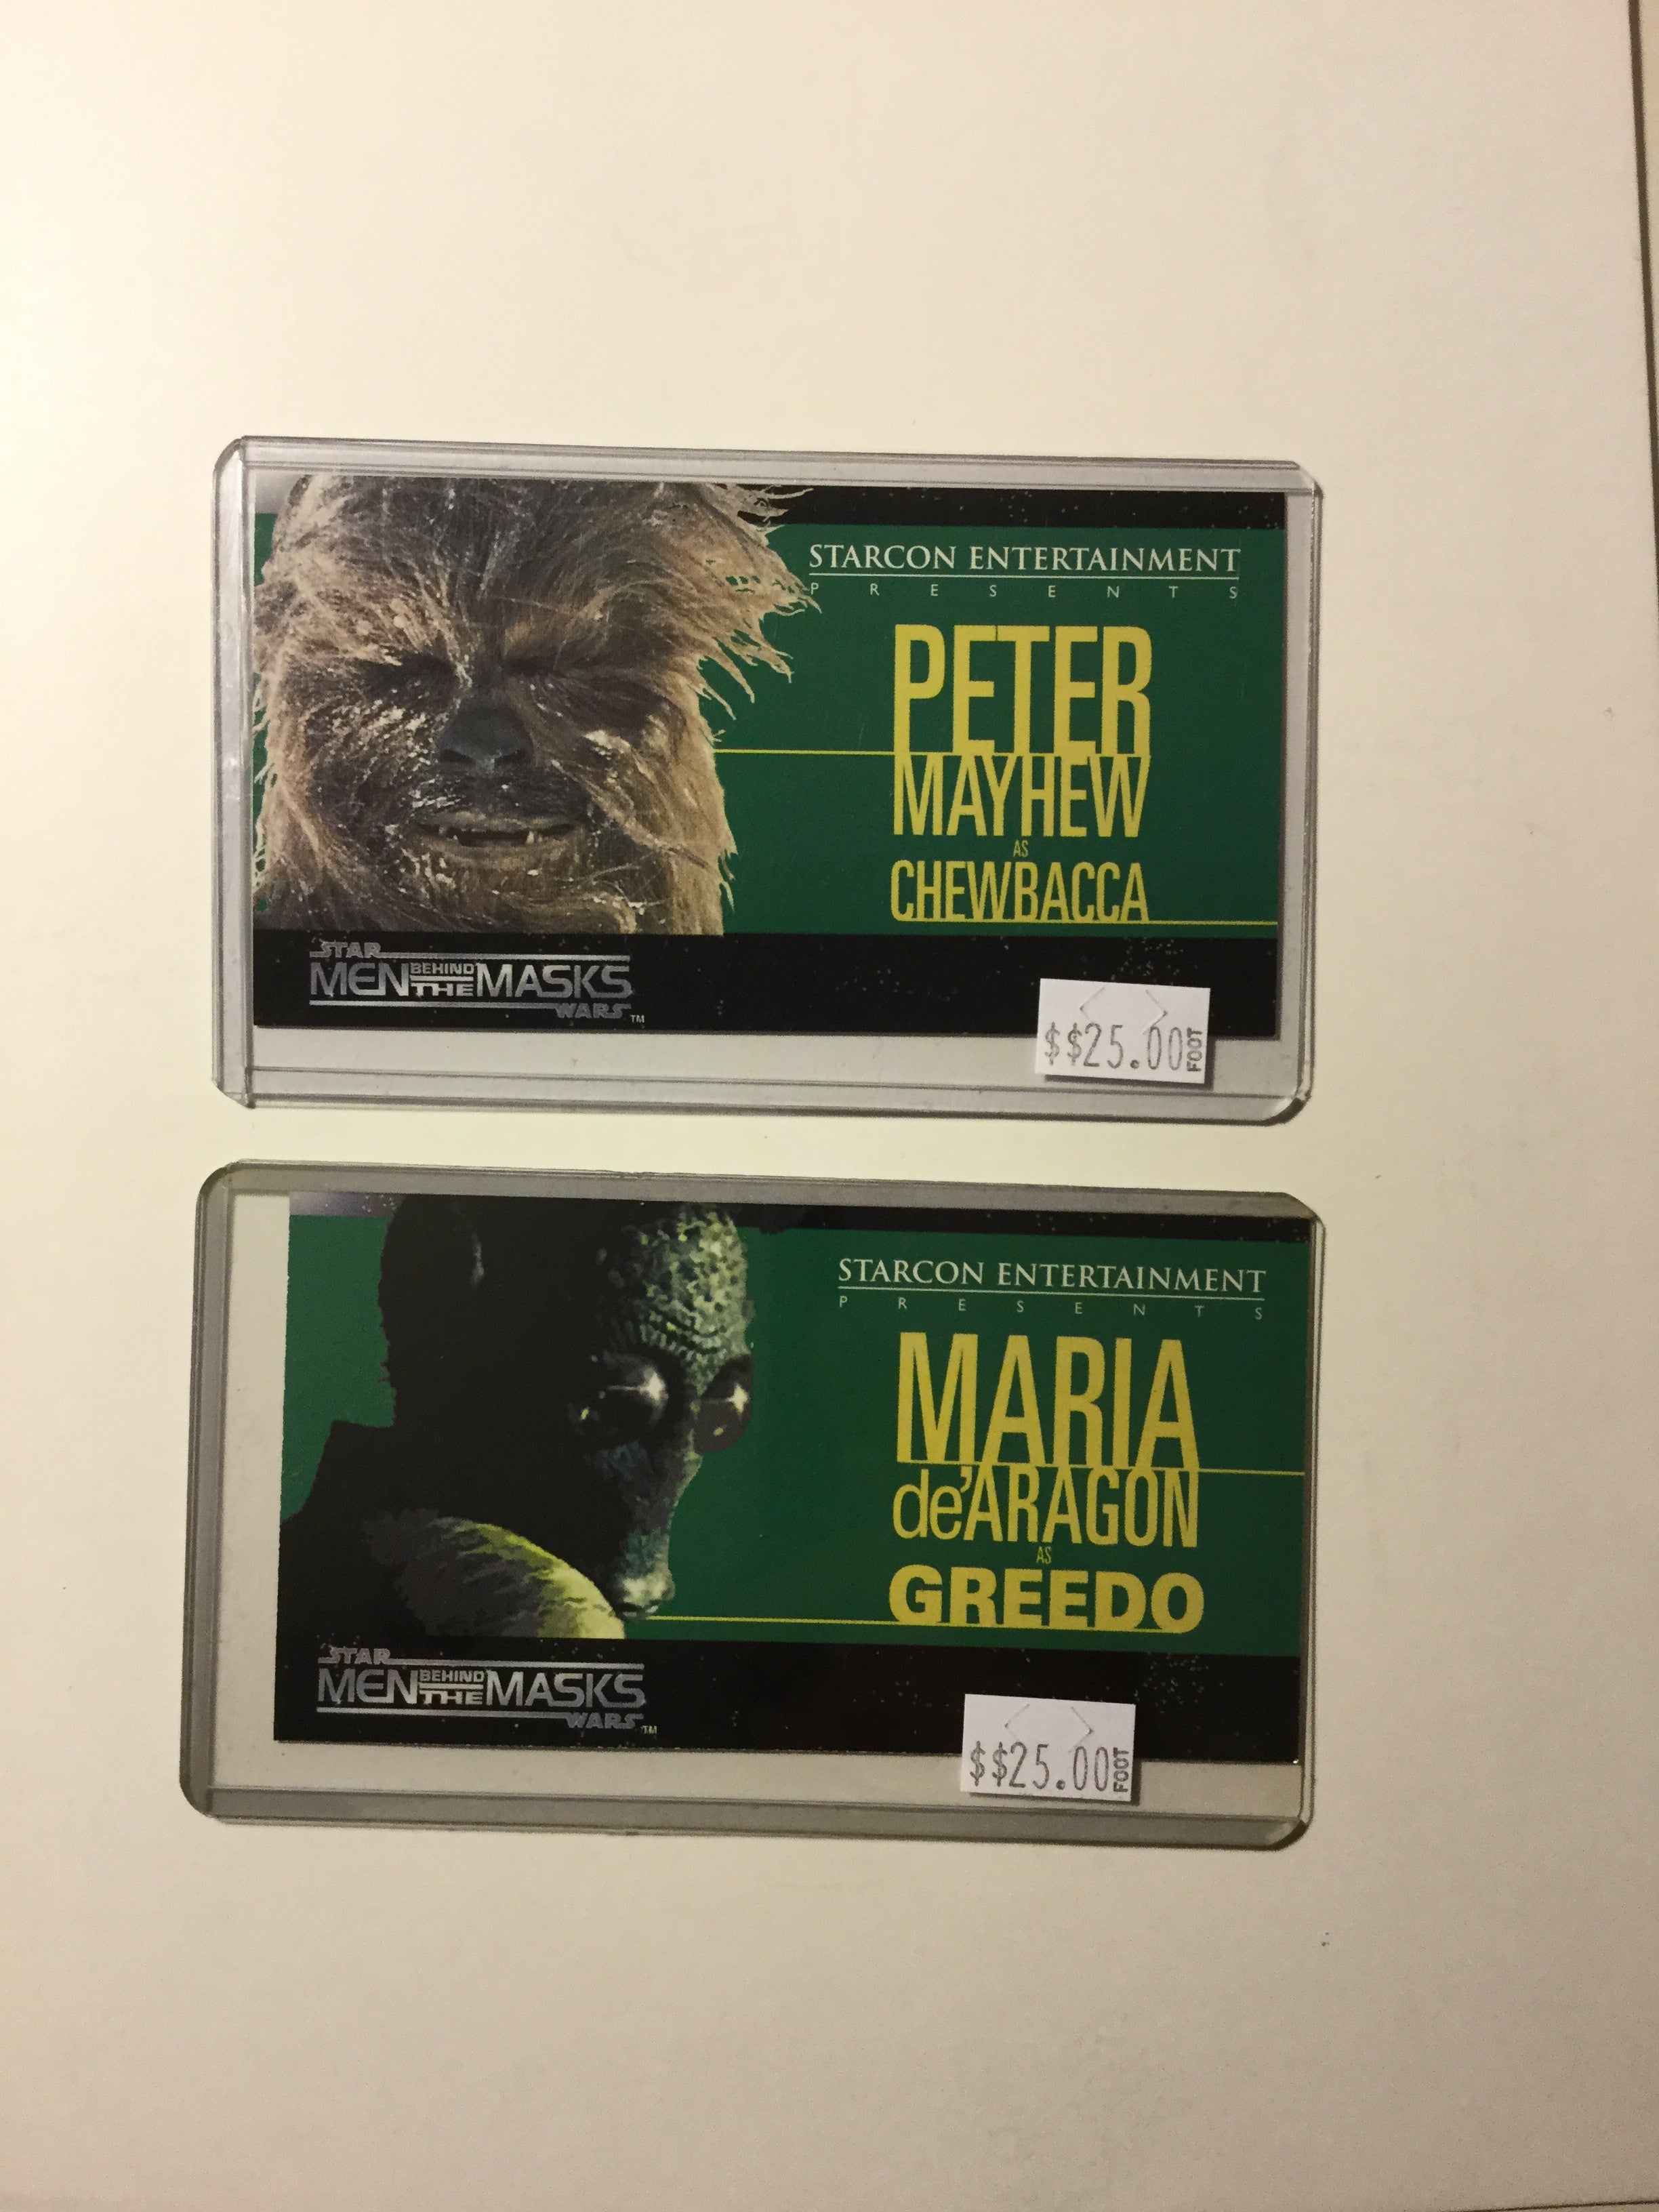 Star Wars Starcon  Chewbacca and Greedo cards 1990s